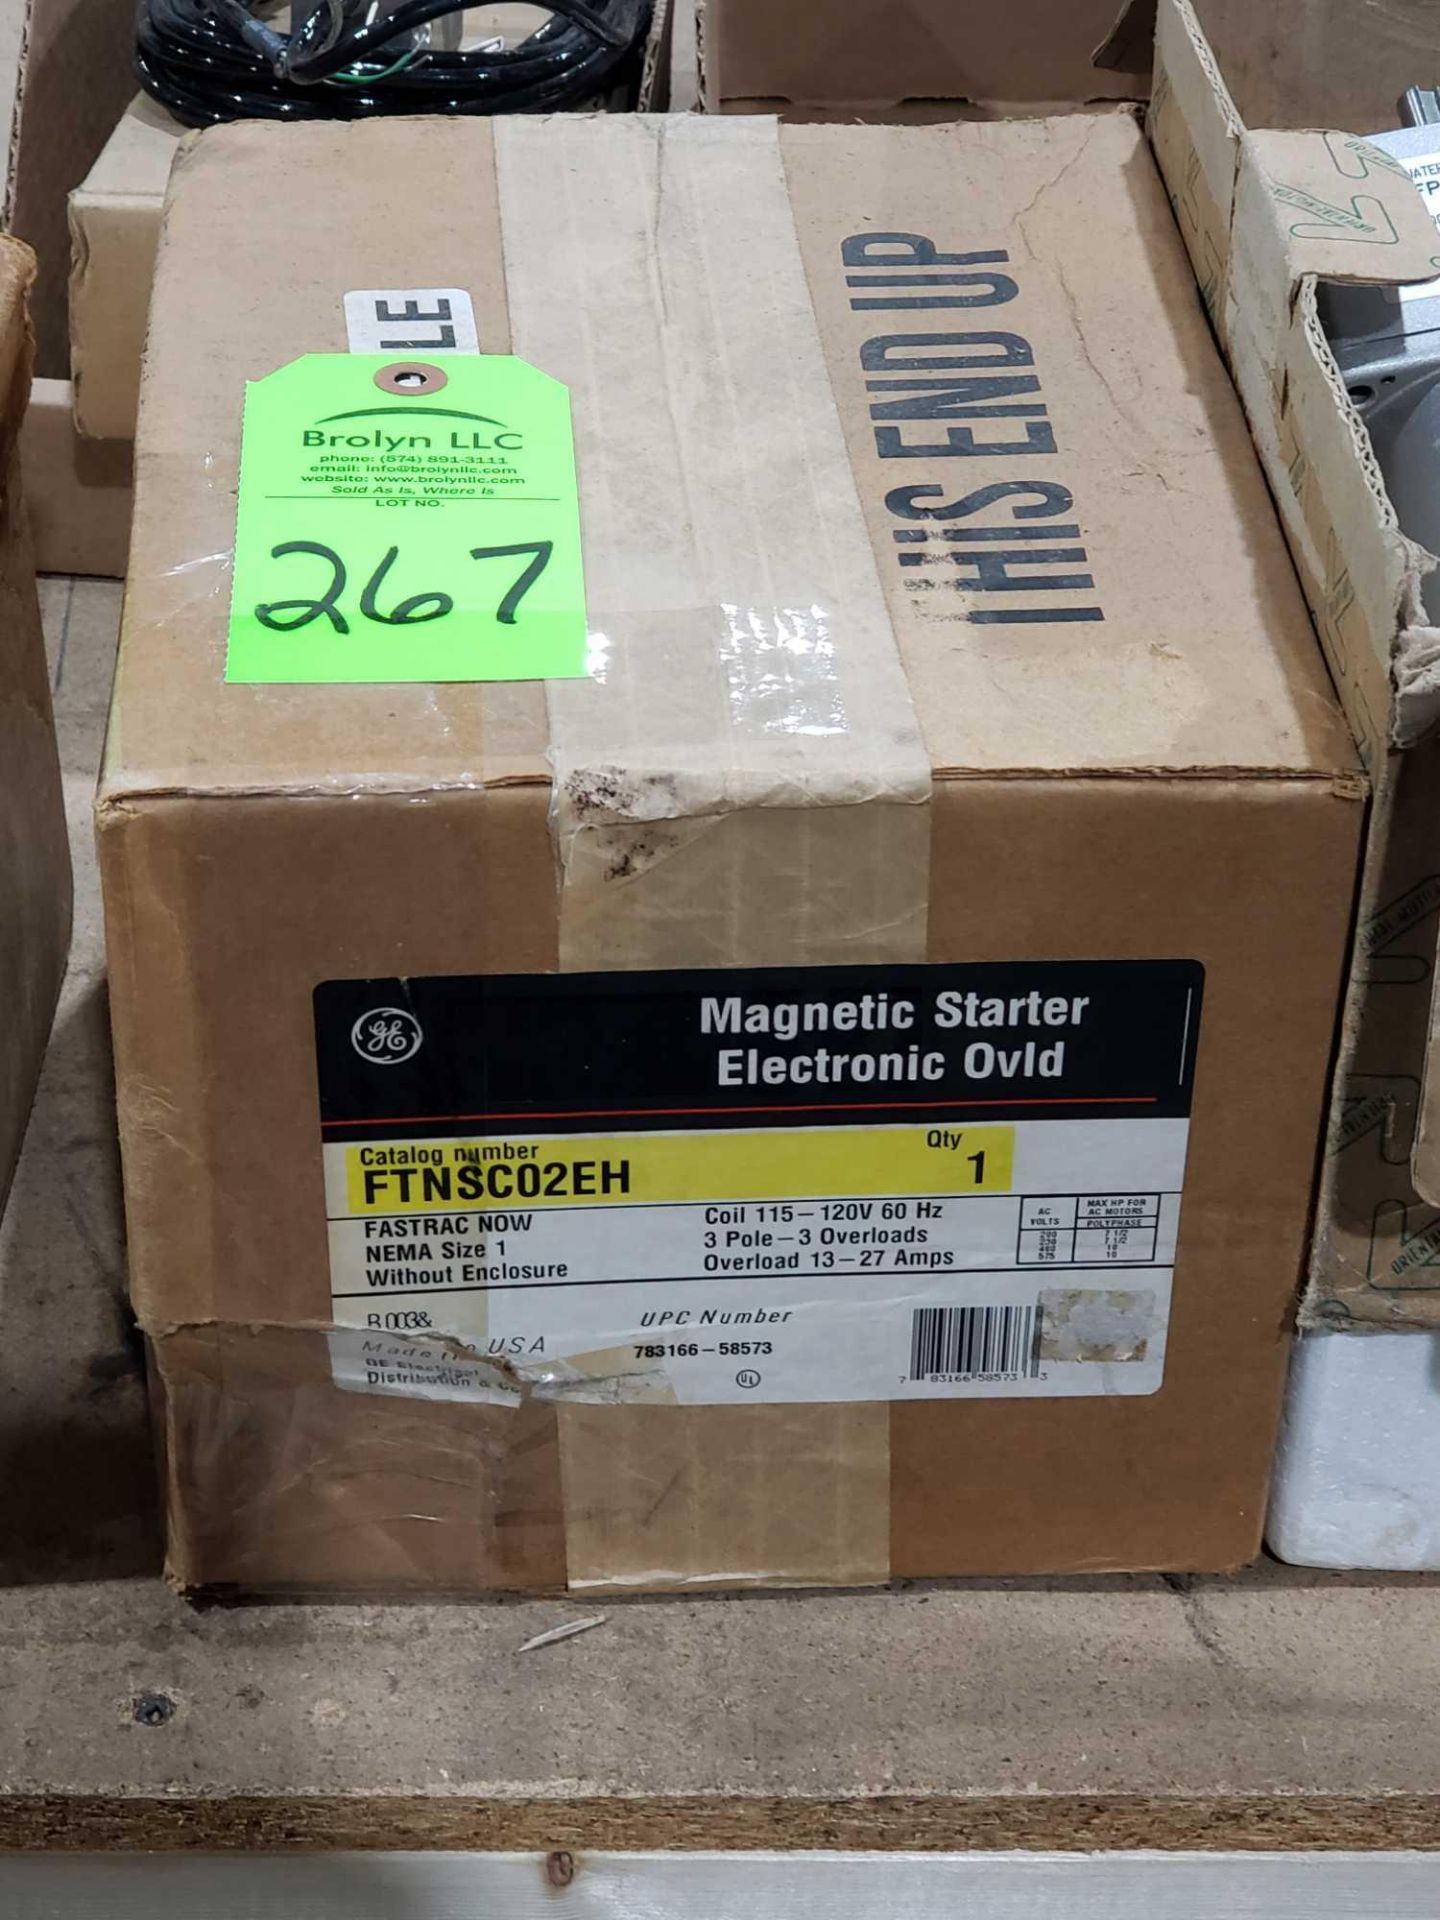 GE Magnetic Starter Electronic Overload. Catalog number FTNSC02EH. New in box.